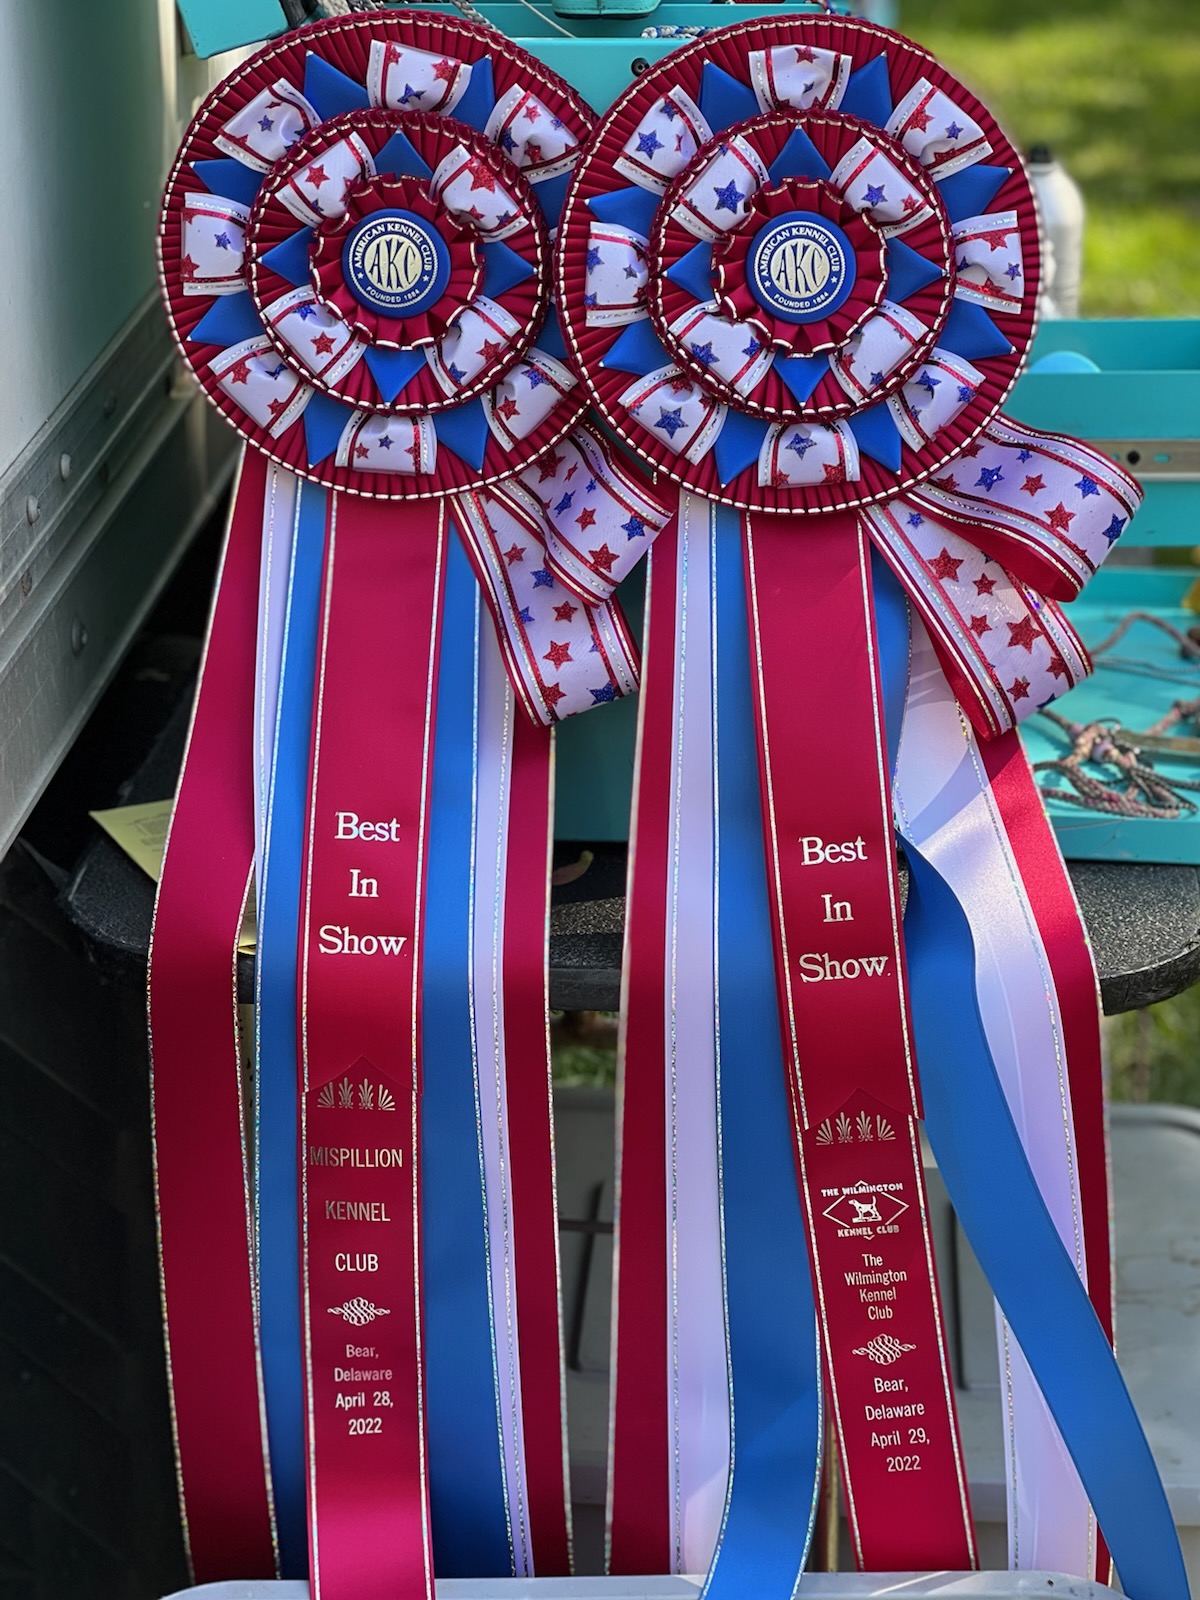 Back-to-back Best In Show Wins